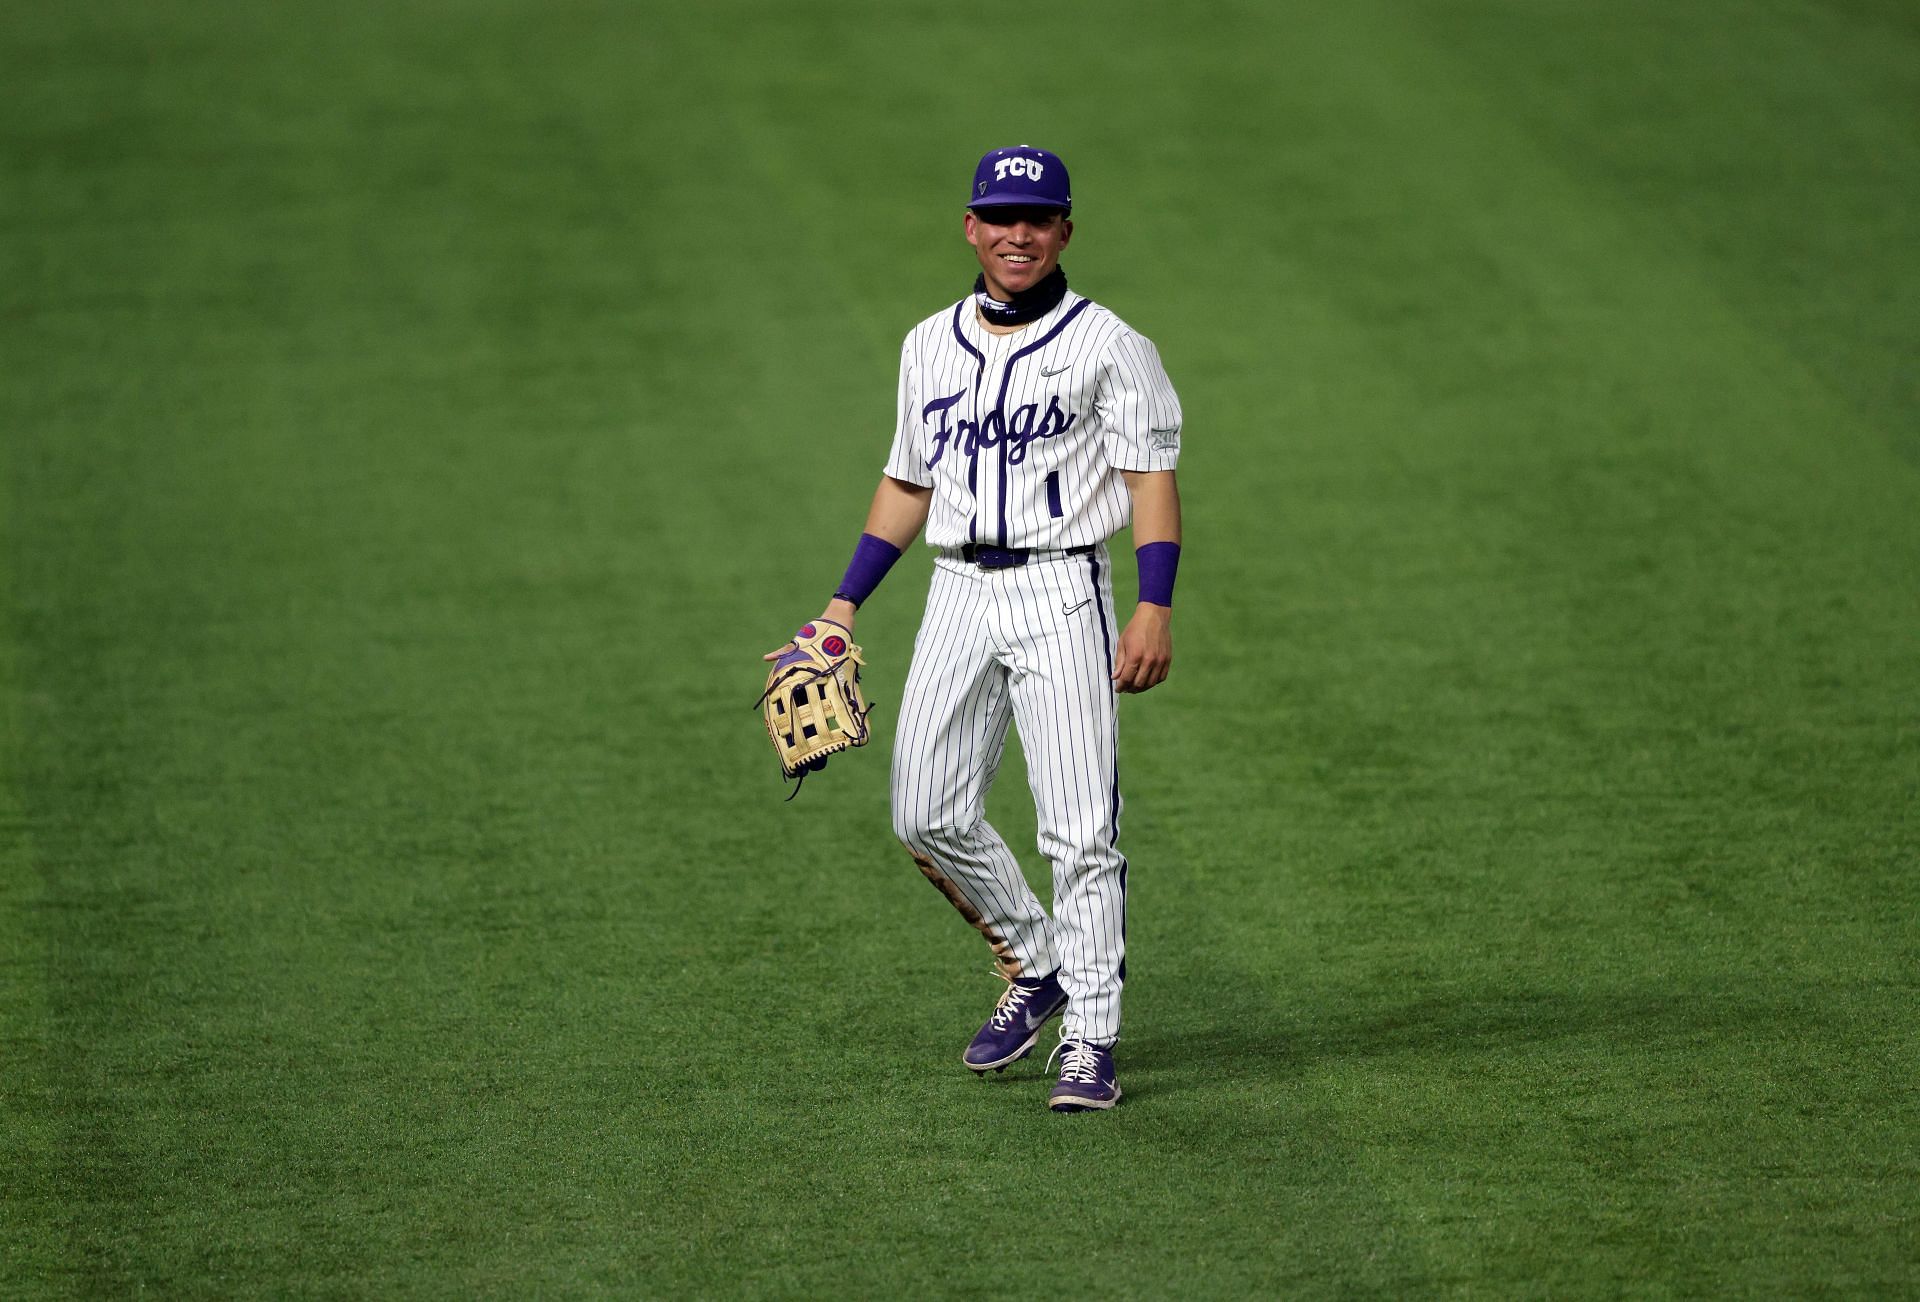 The Frogs showed grit in advancing to the final four of the College World Series